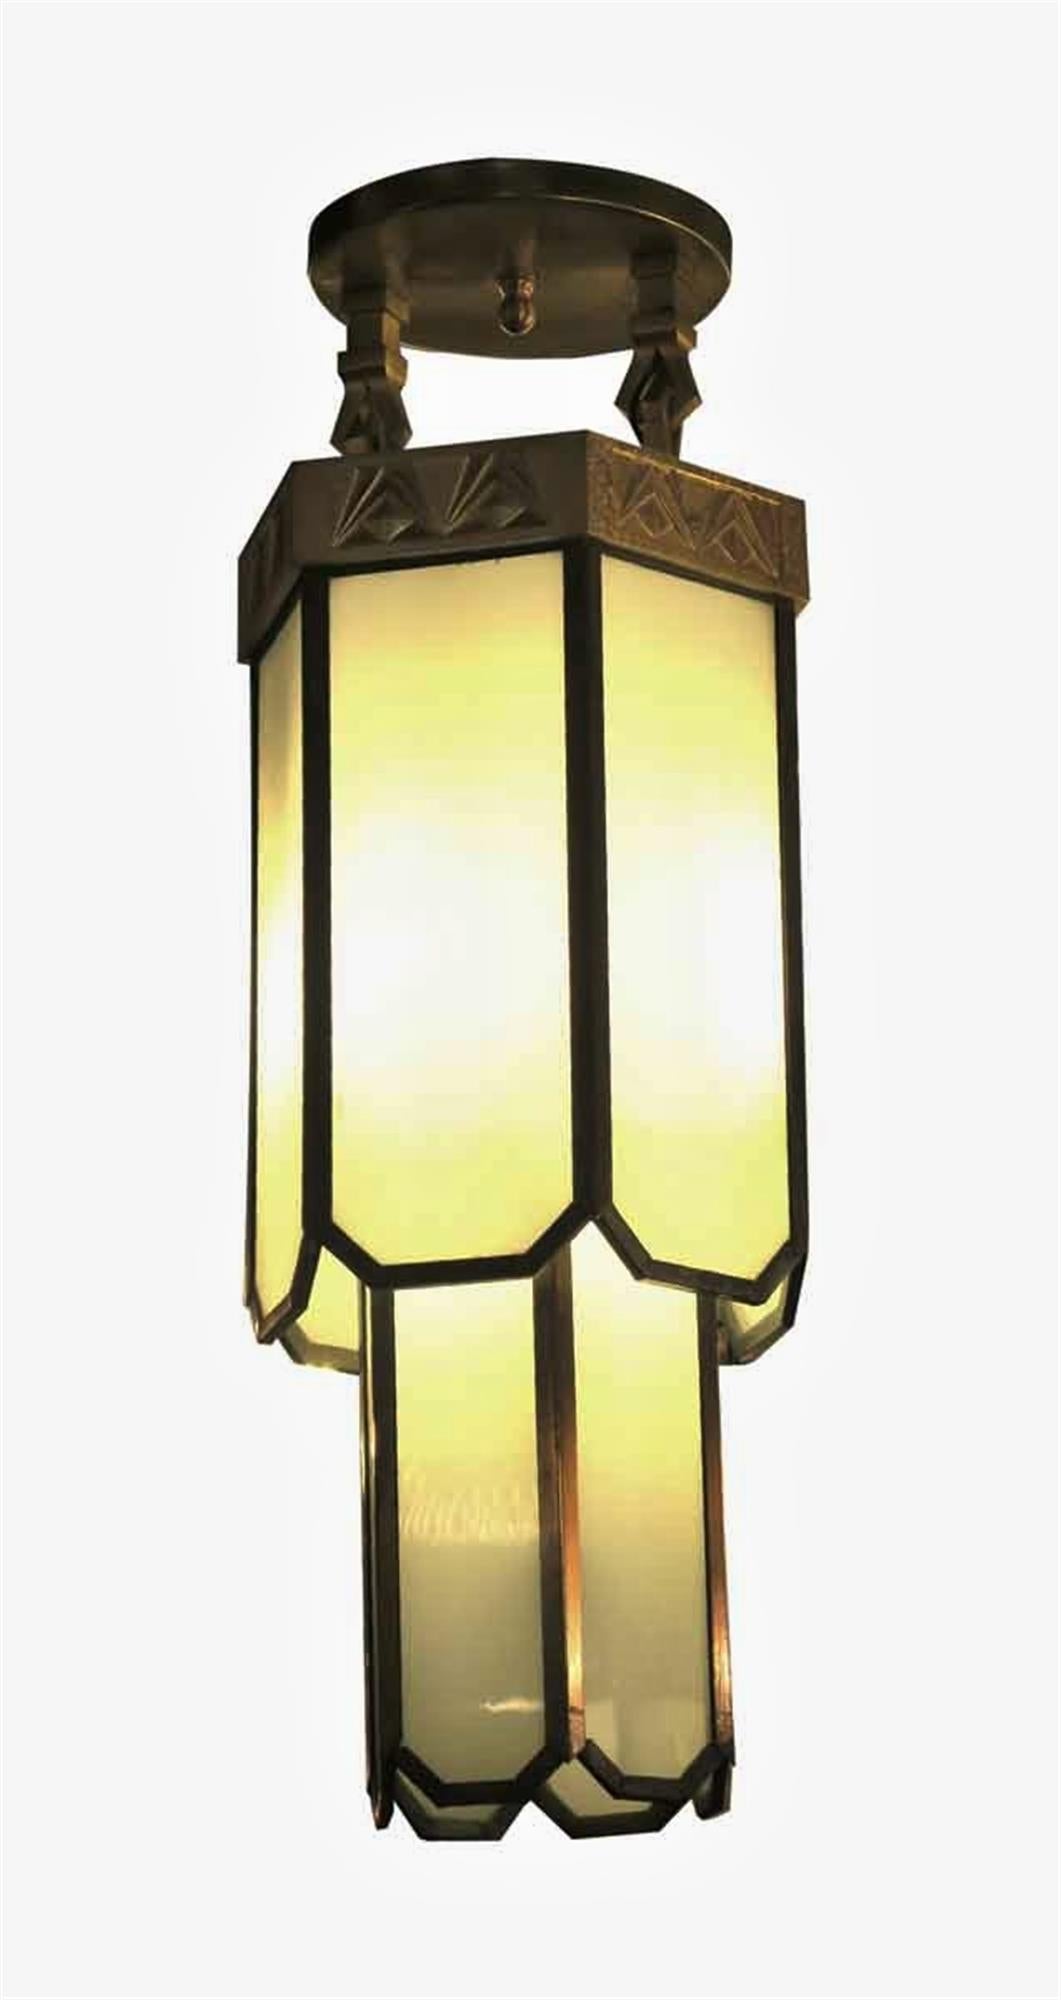 Two-tier Art Deco gilded bronze and leaded glass pendant light from the 1930s. Three sockets. This was salvaged from the Hamilton manufacturing plant in Two Rivers, WI. This can be viewed at one of our New York City locations. Please inquire for the